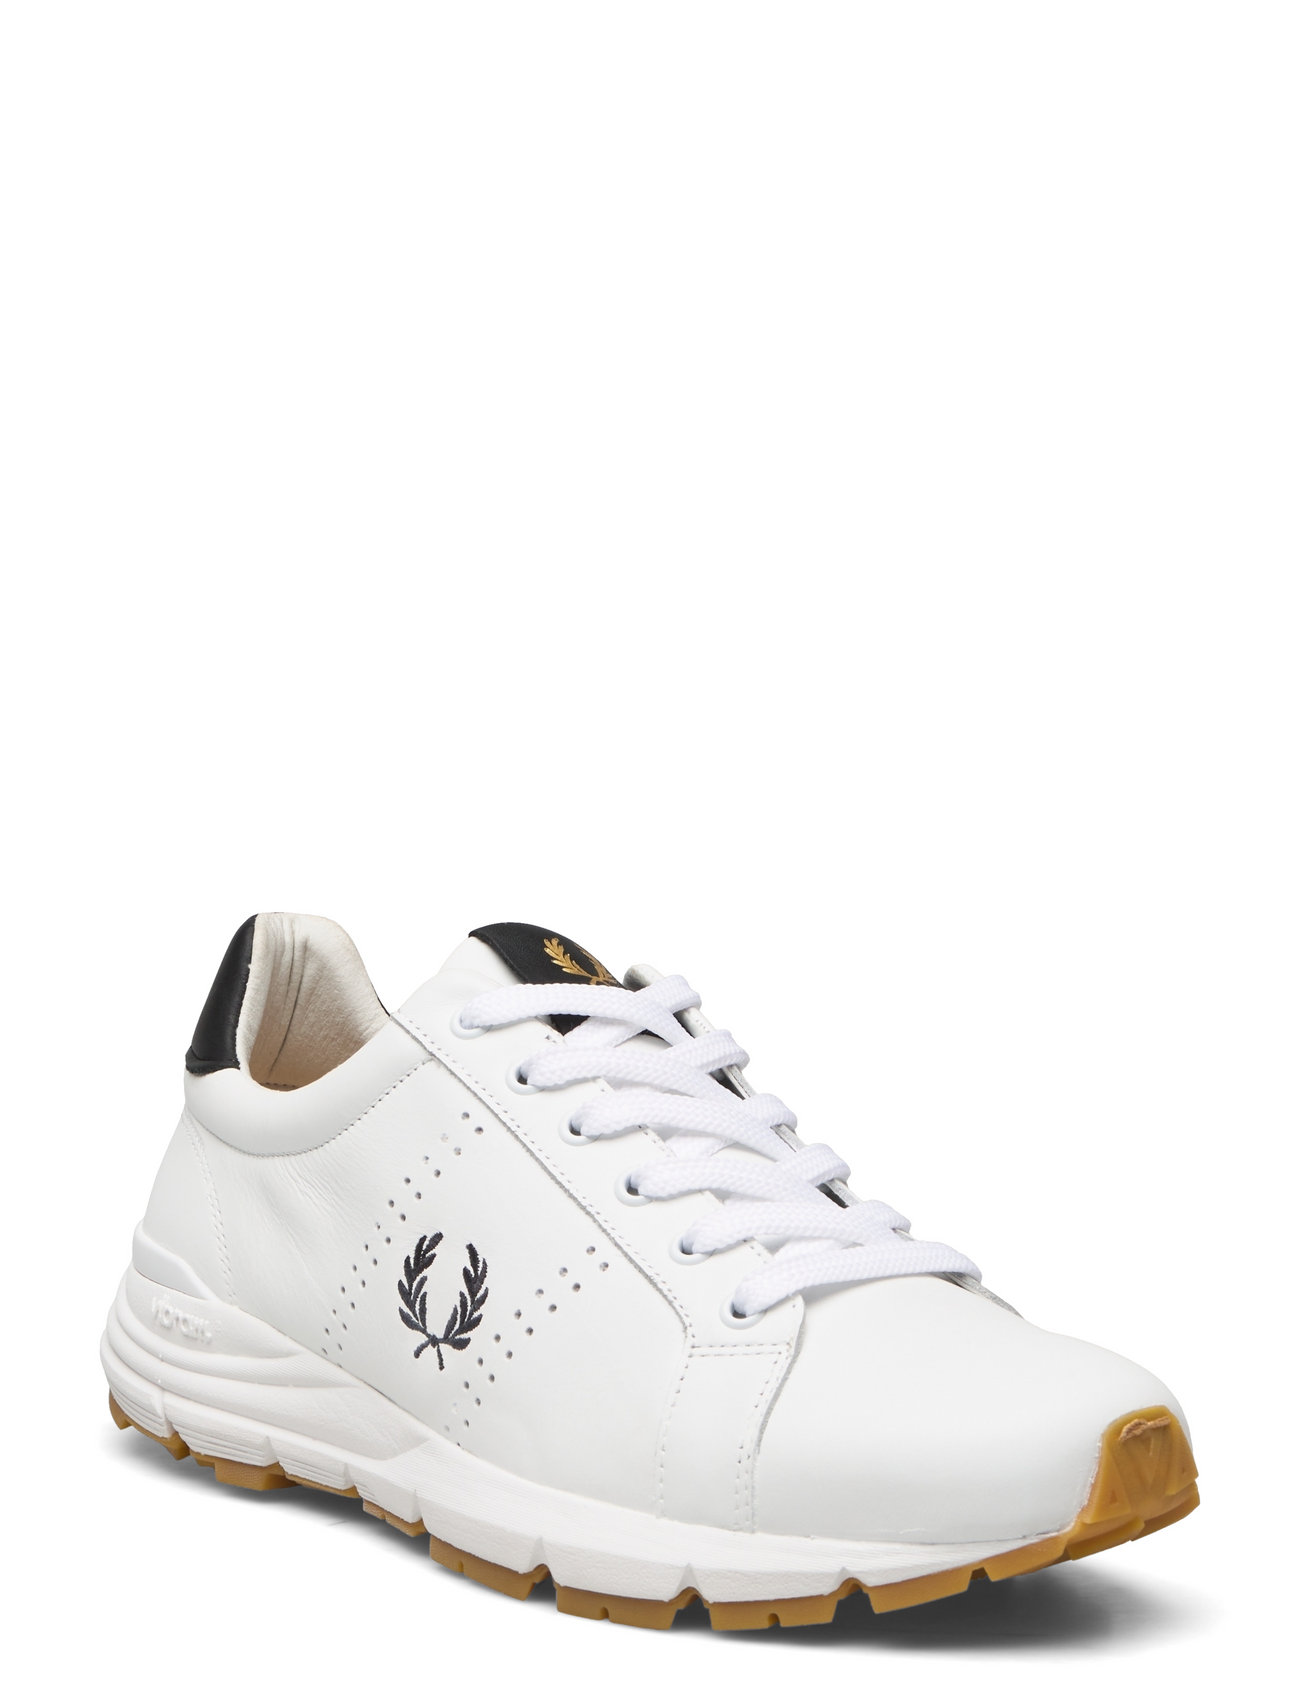 Fred Perry Leather - Lave sneakers - Boozt.com